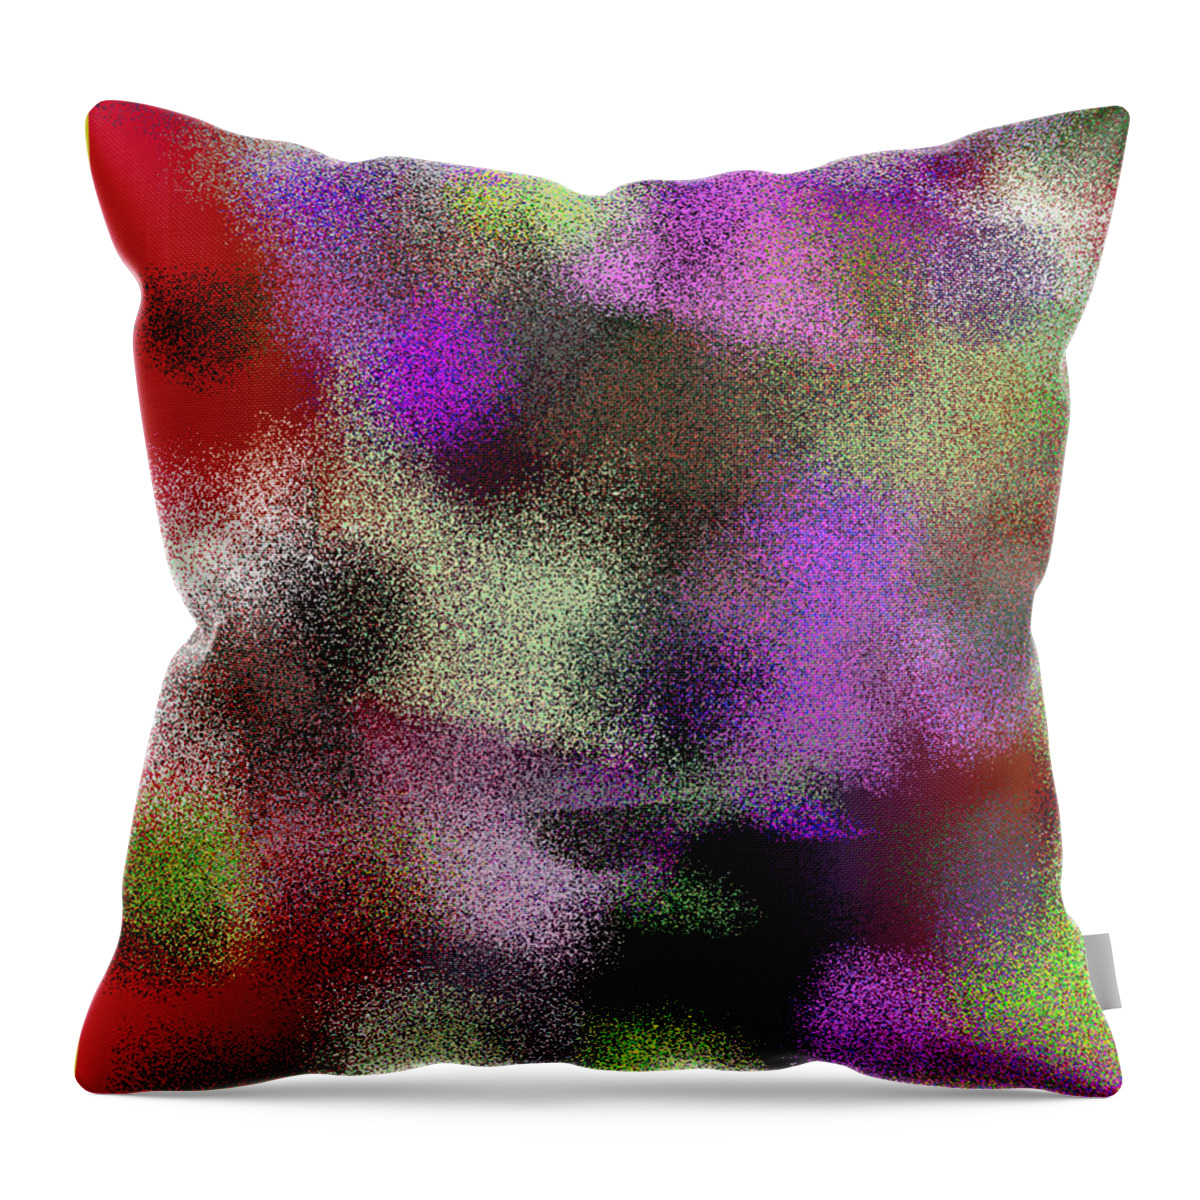 Abstract Throw Pillow featuring the digital art T.1.568.36.3x4.3840x5120 by Gareth Lewis